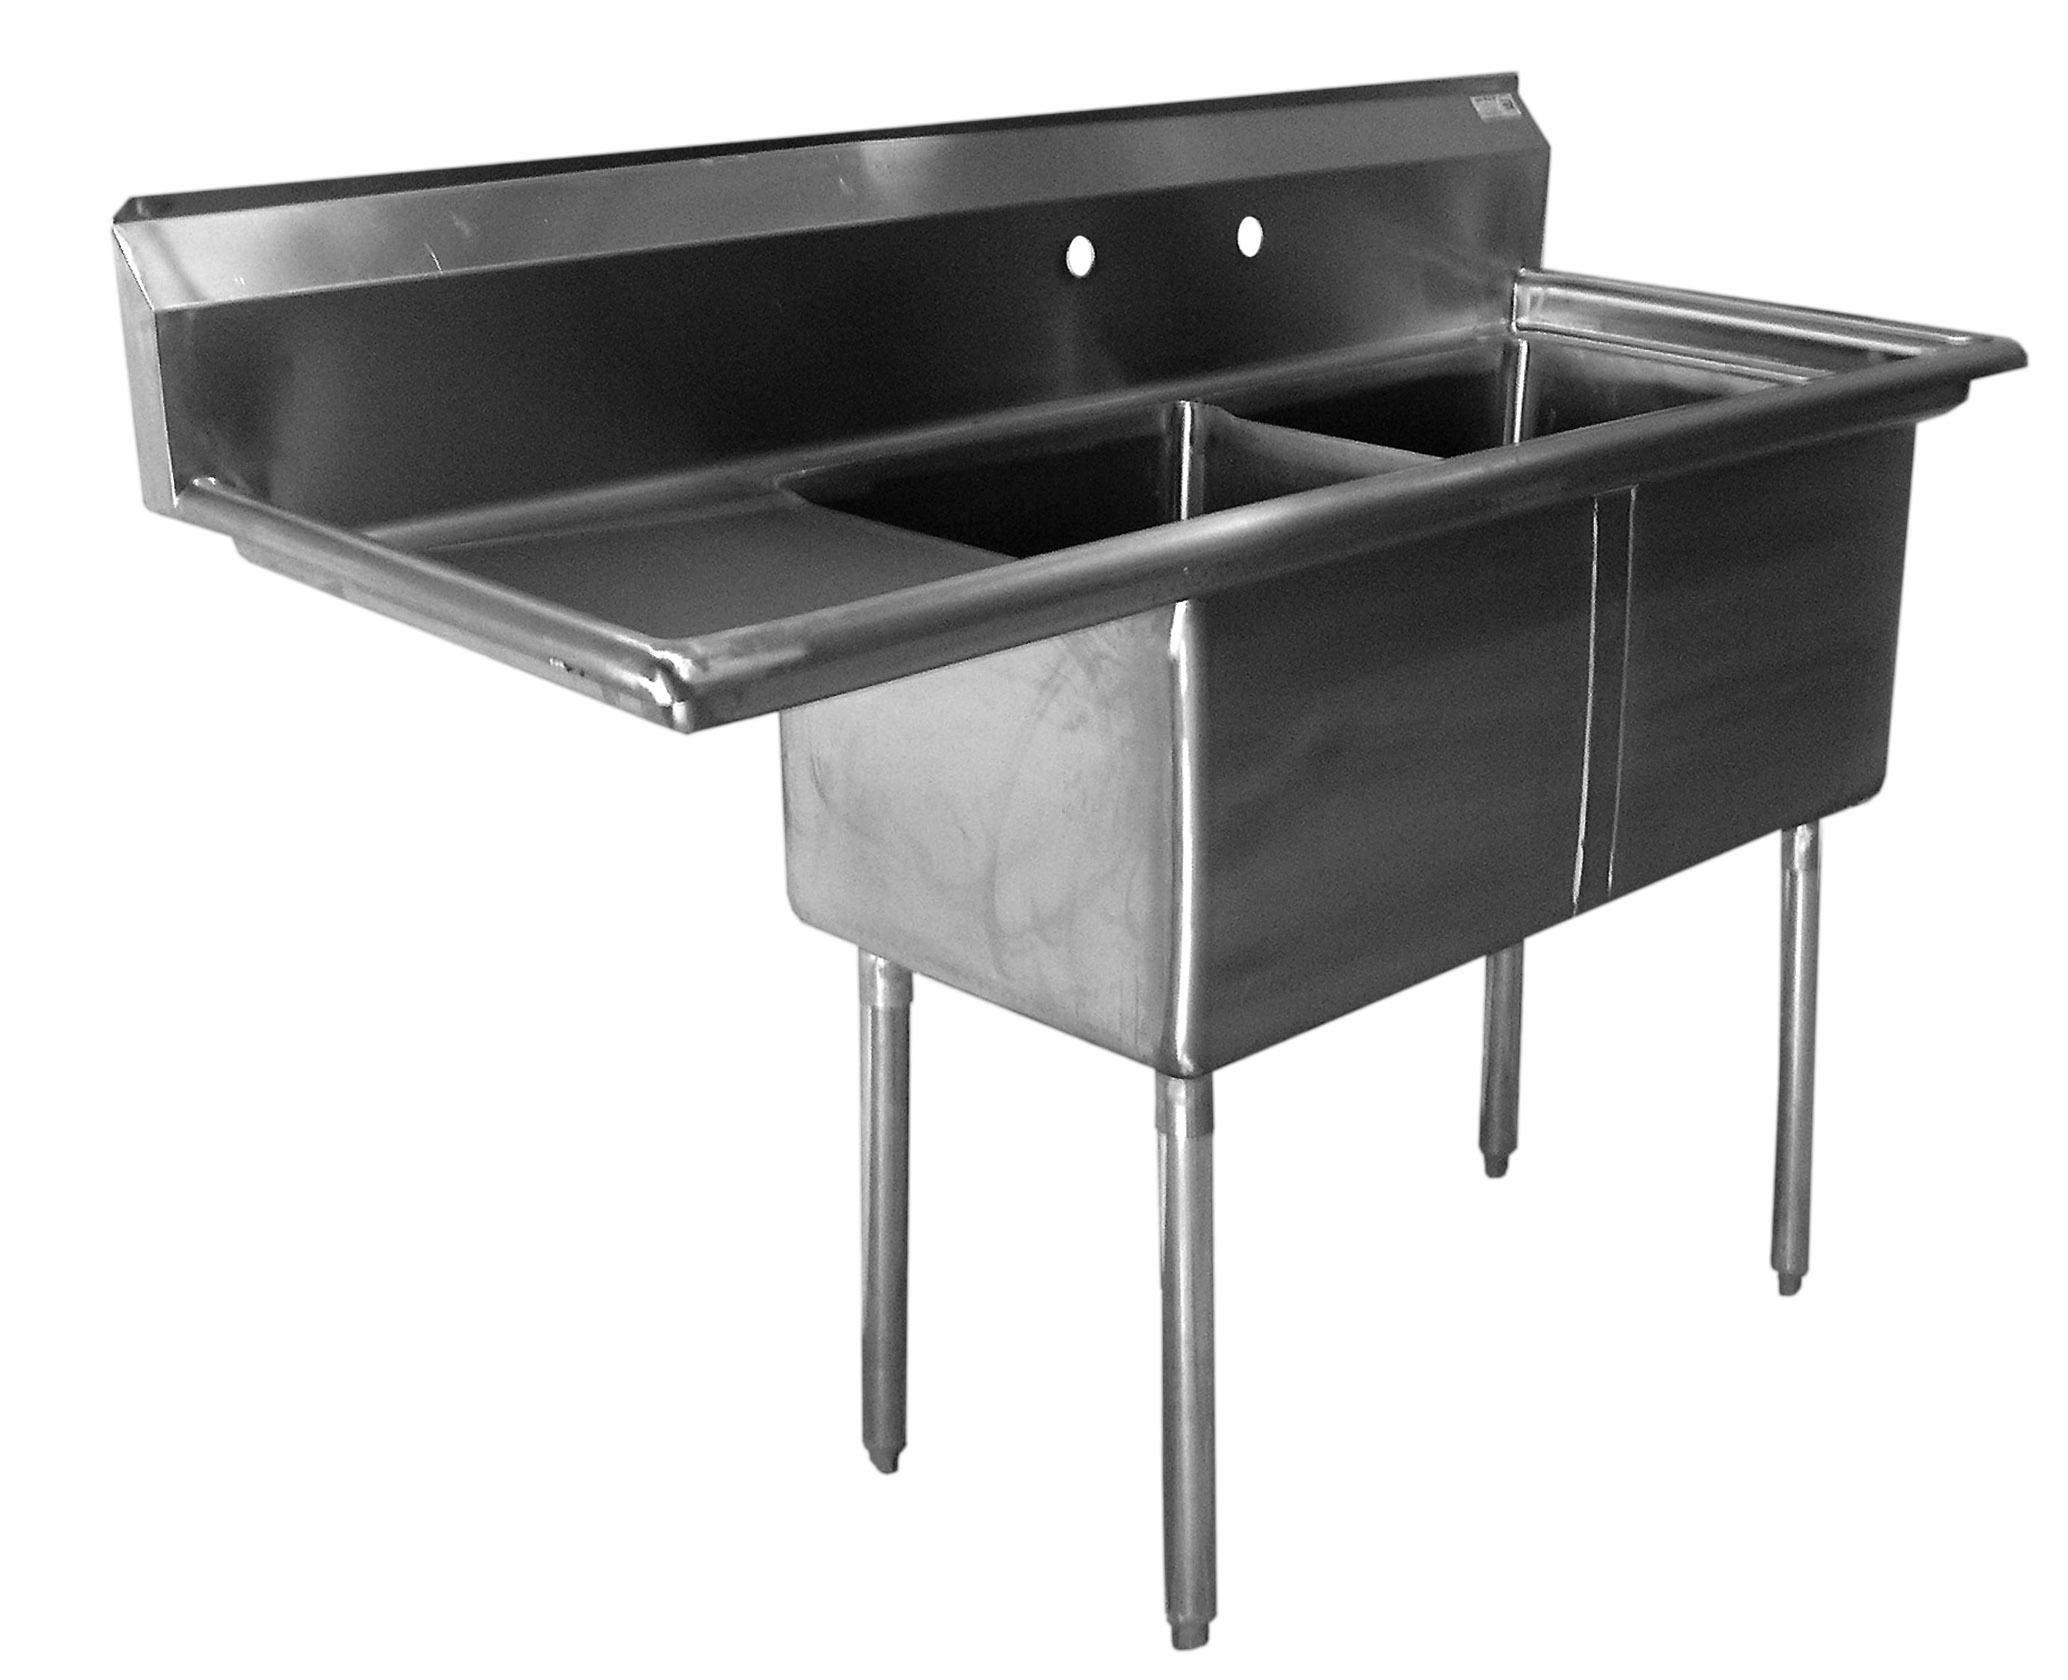 SSP Two Tub SE Series Sinks - 11quot Deep - New Two Tub | BakeryEquipment.com is your bakery